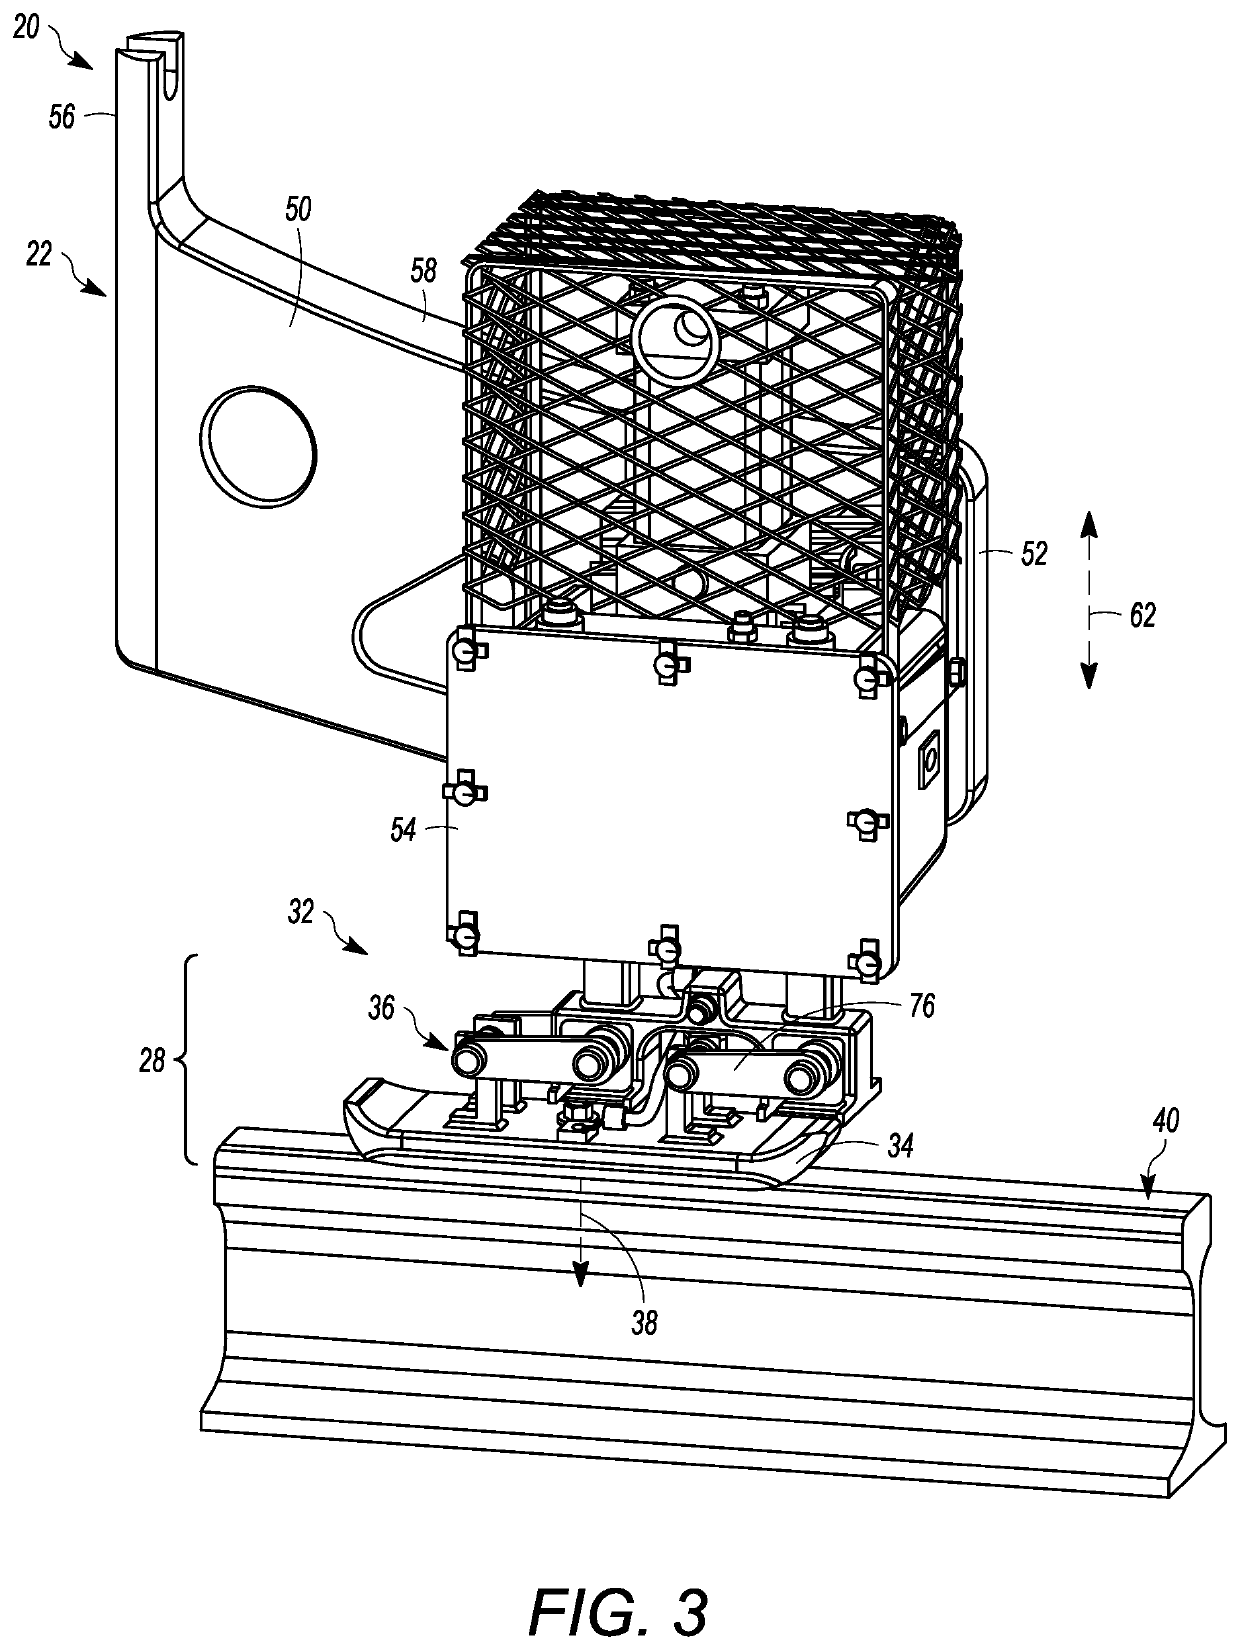 Electrical shunt apparatus and system